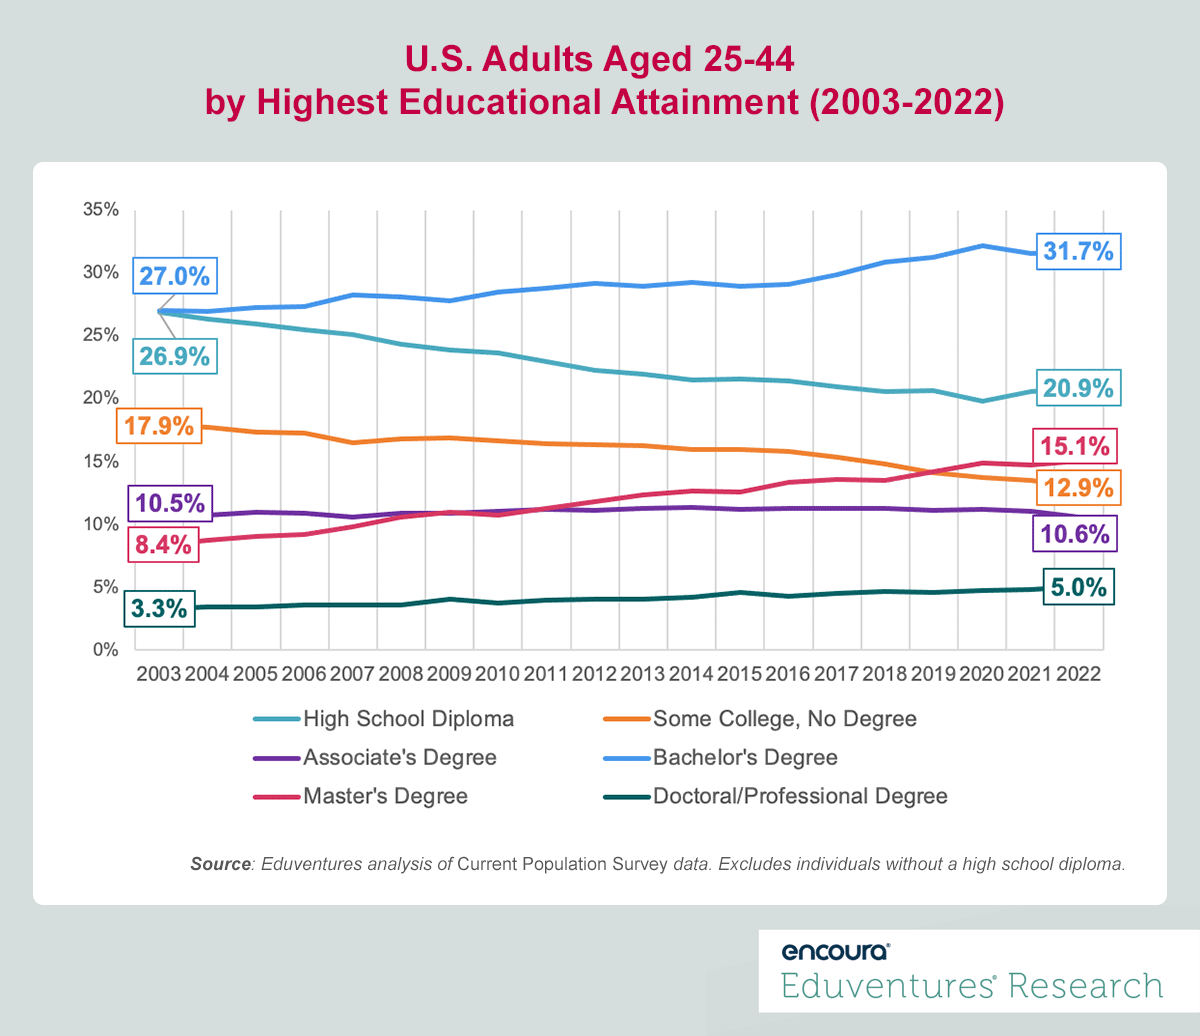 US Adults Aged 25-44 by Highest Educational Attainment